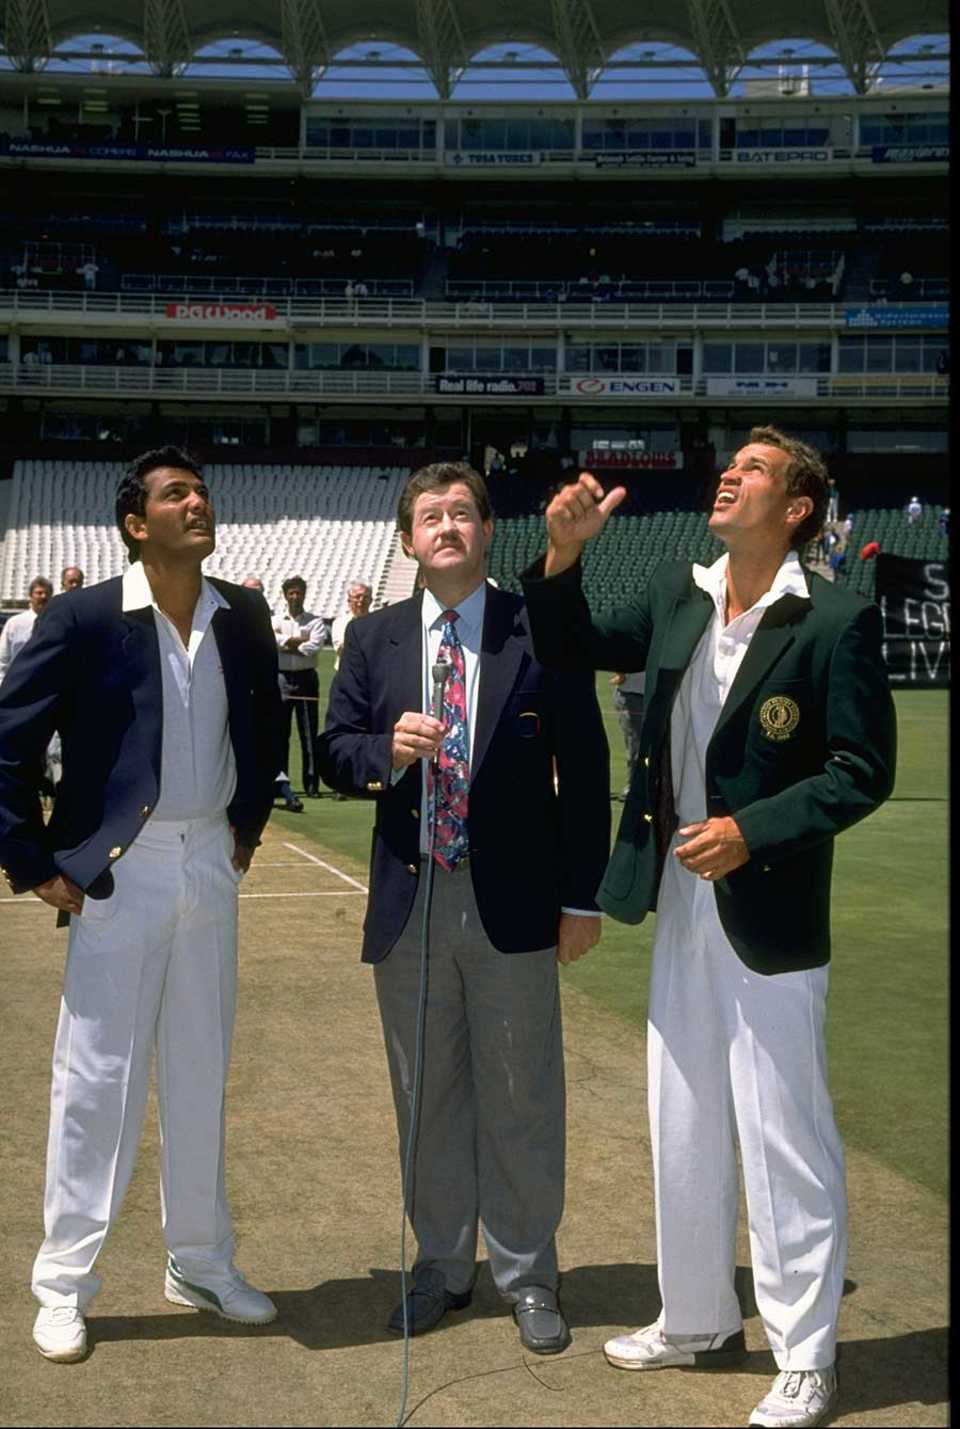 Mohammad Azharuddin and Kepler Wessels at the toss in Johannesburg